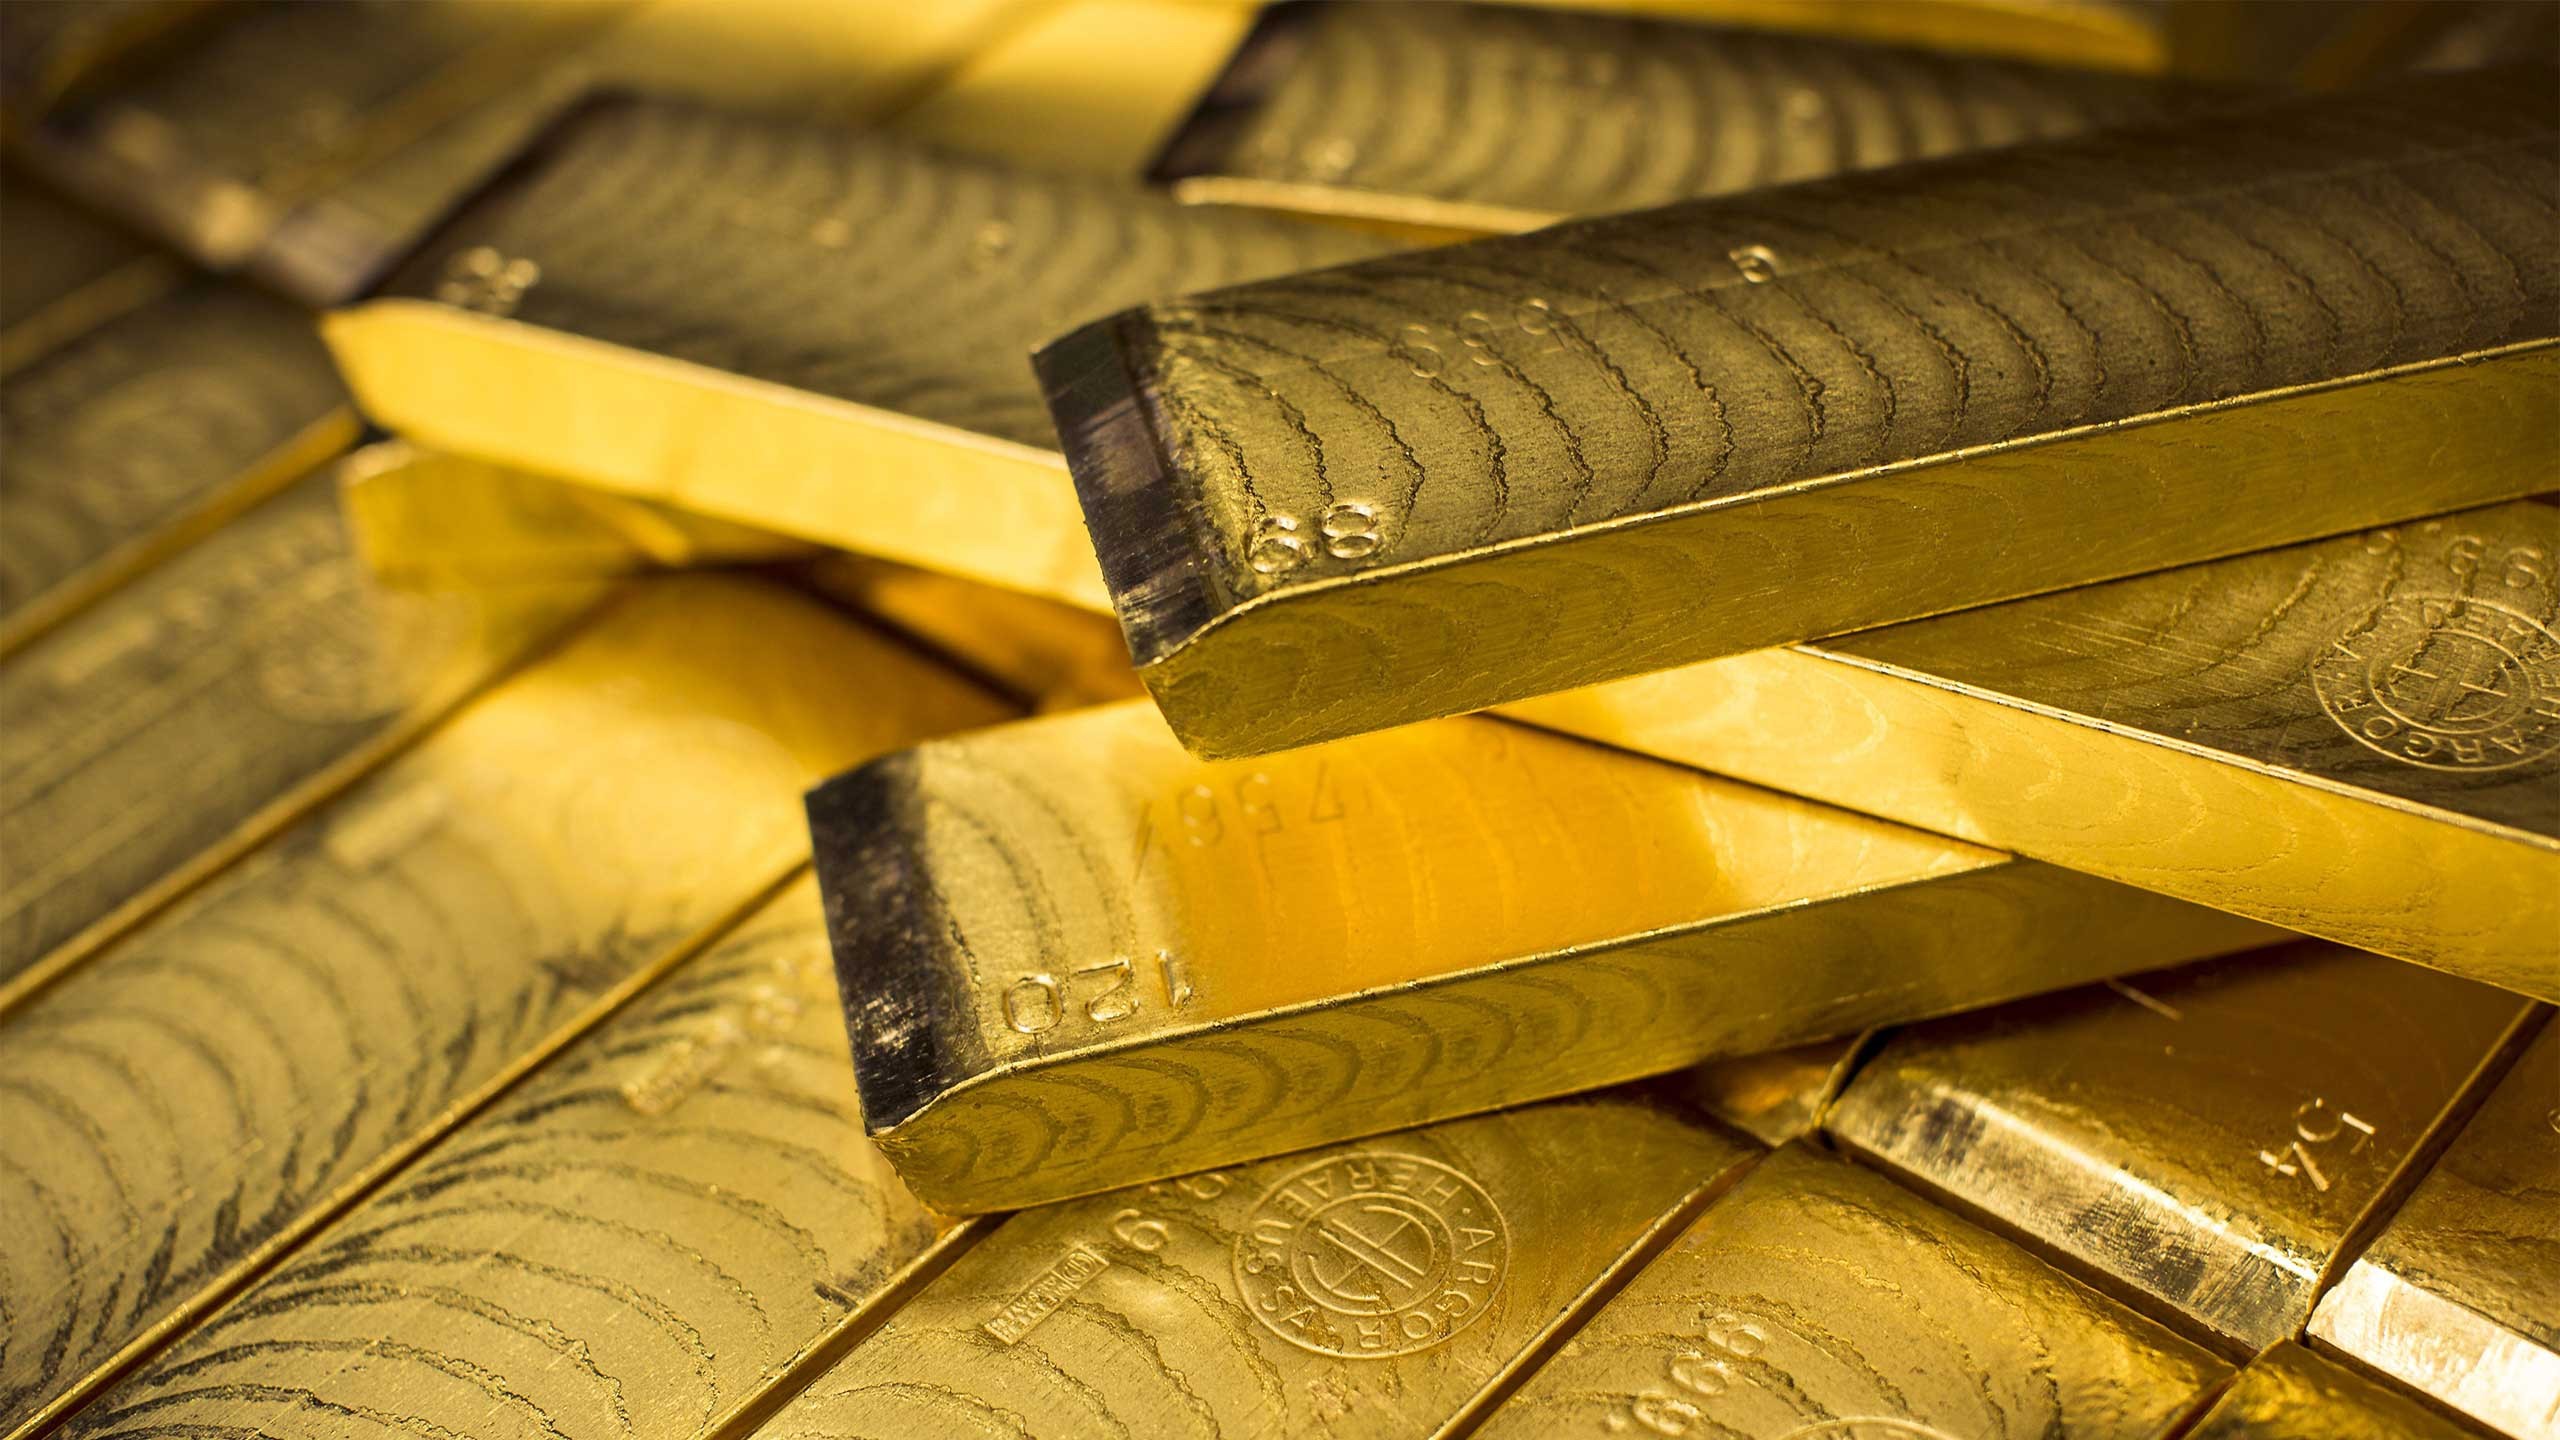 Gold bars stacked